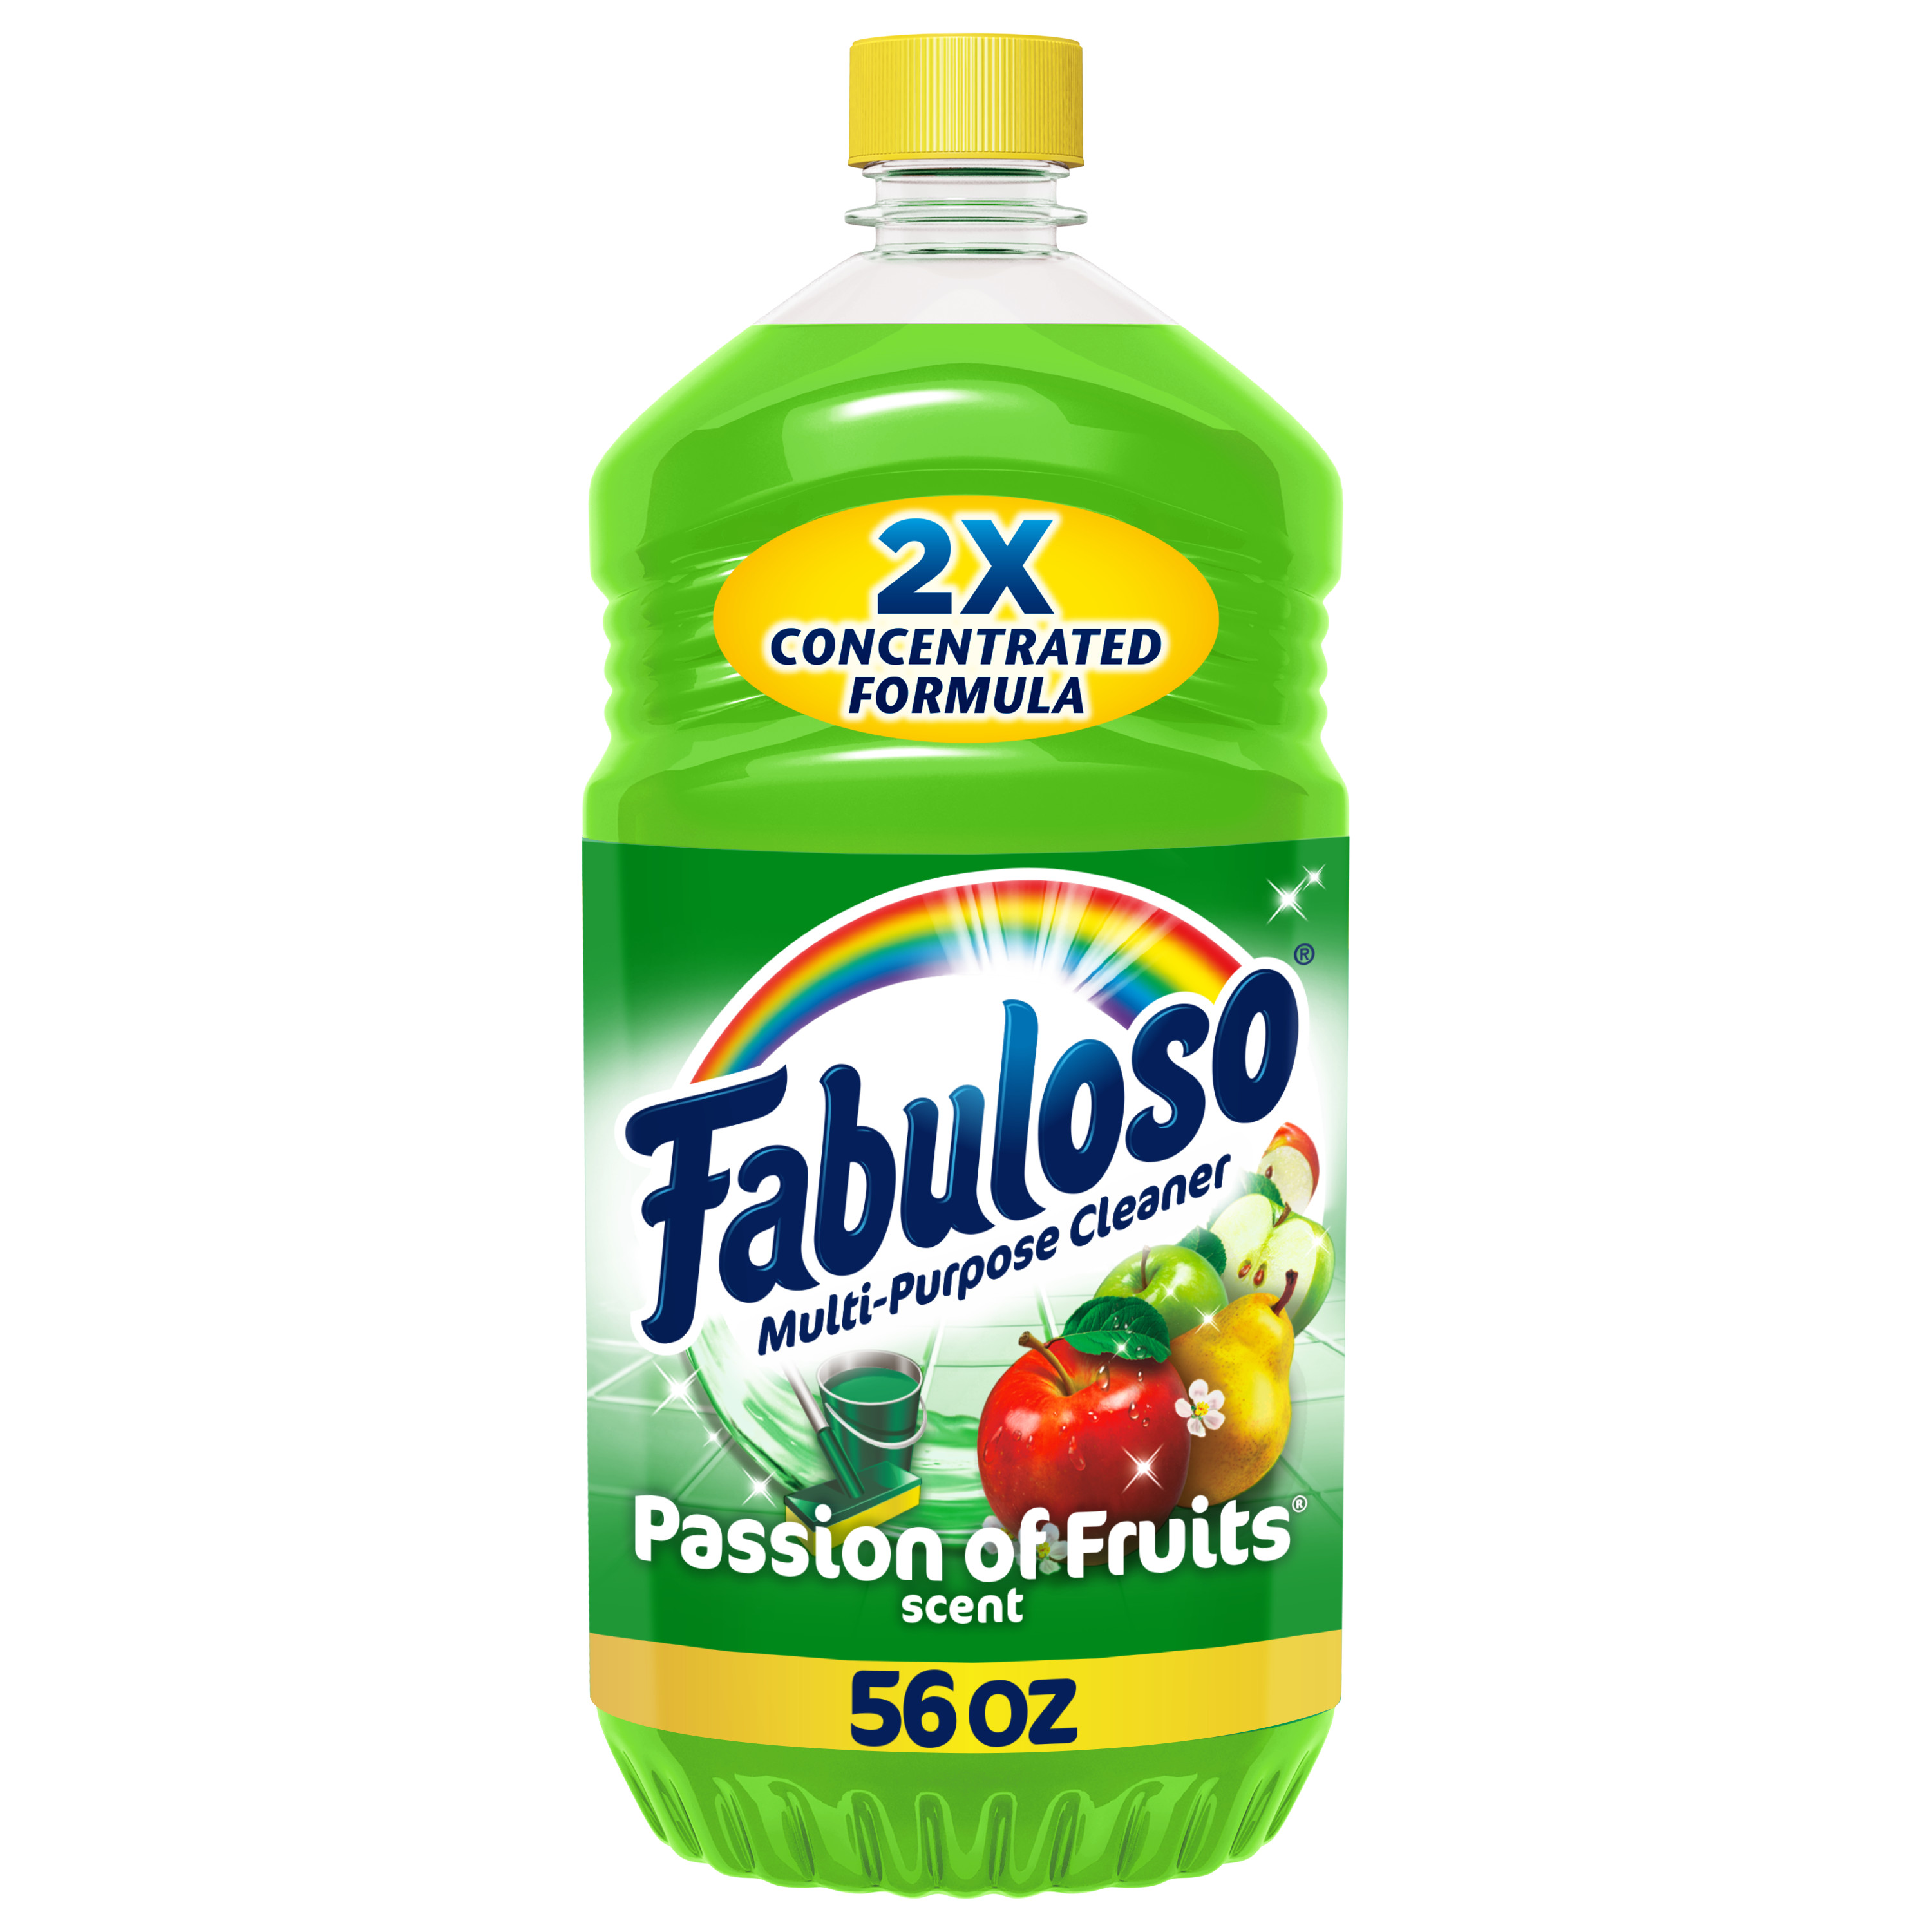 Fabuloso Multi-Purpose Cleaner, 2X Concentrated Formula, Passion of Fruits Scent, 56 oz - image 1 of 12